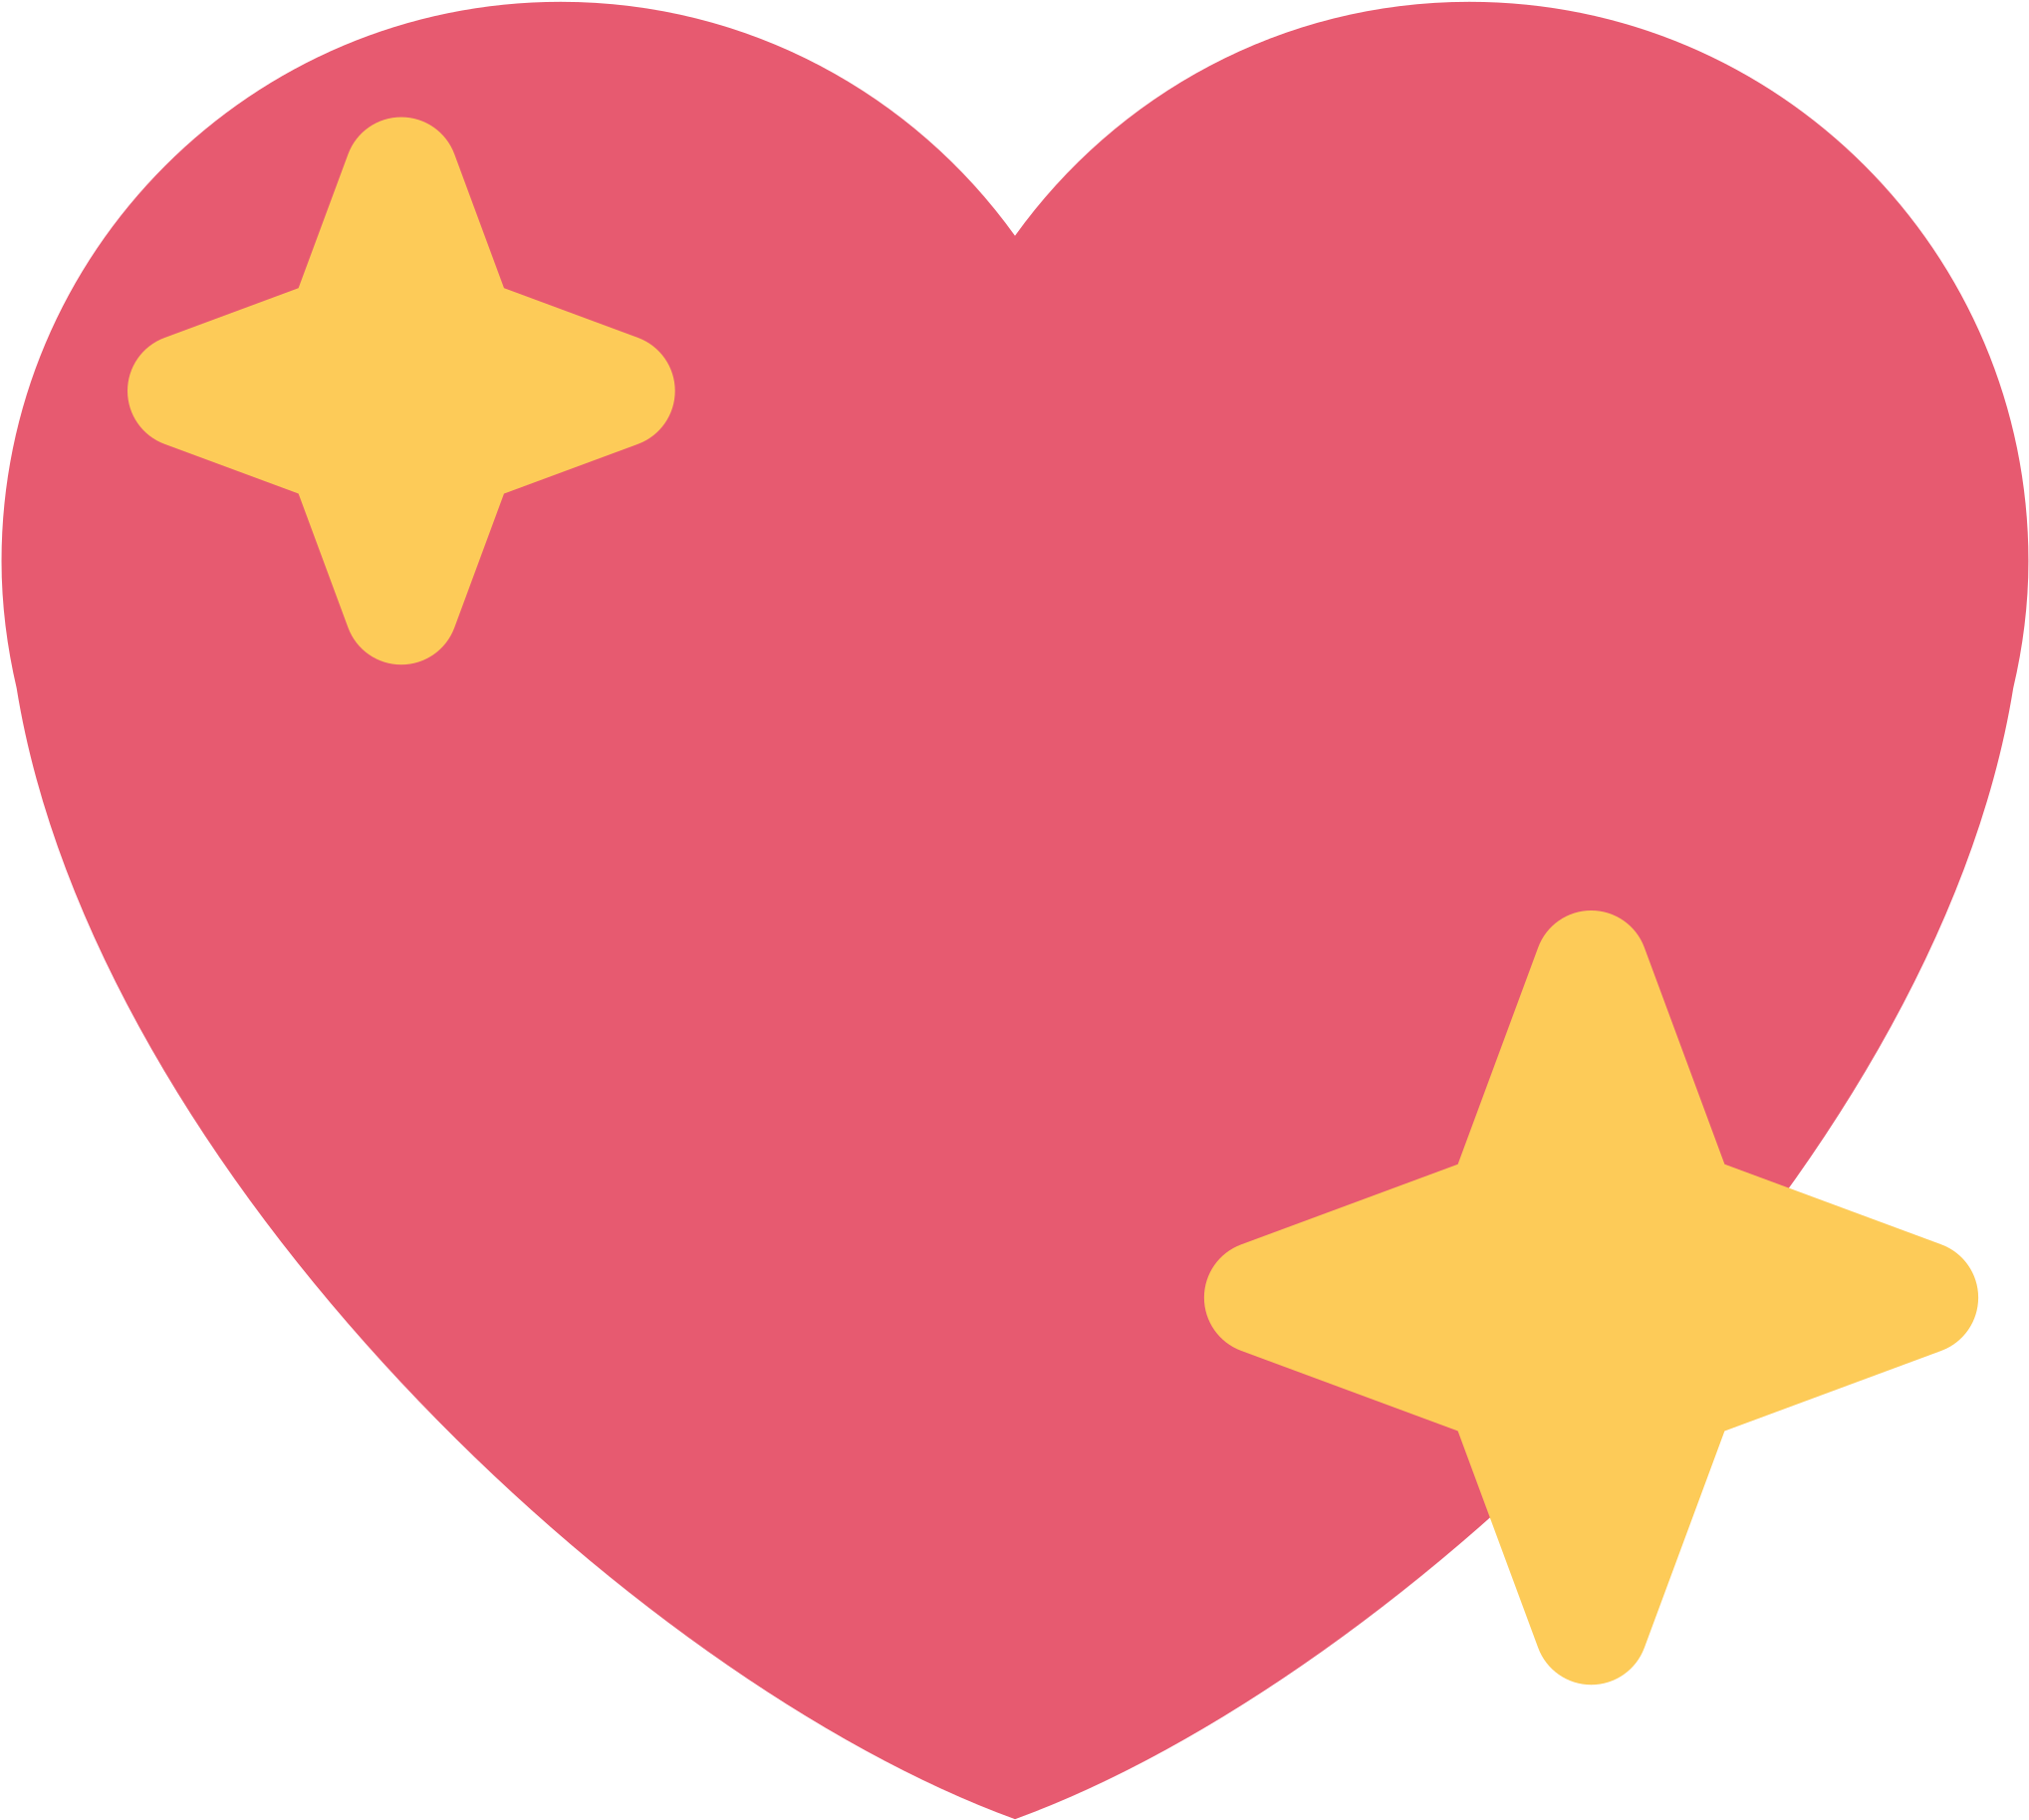 A Heart With Stars On It